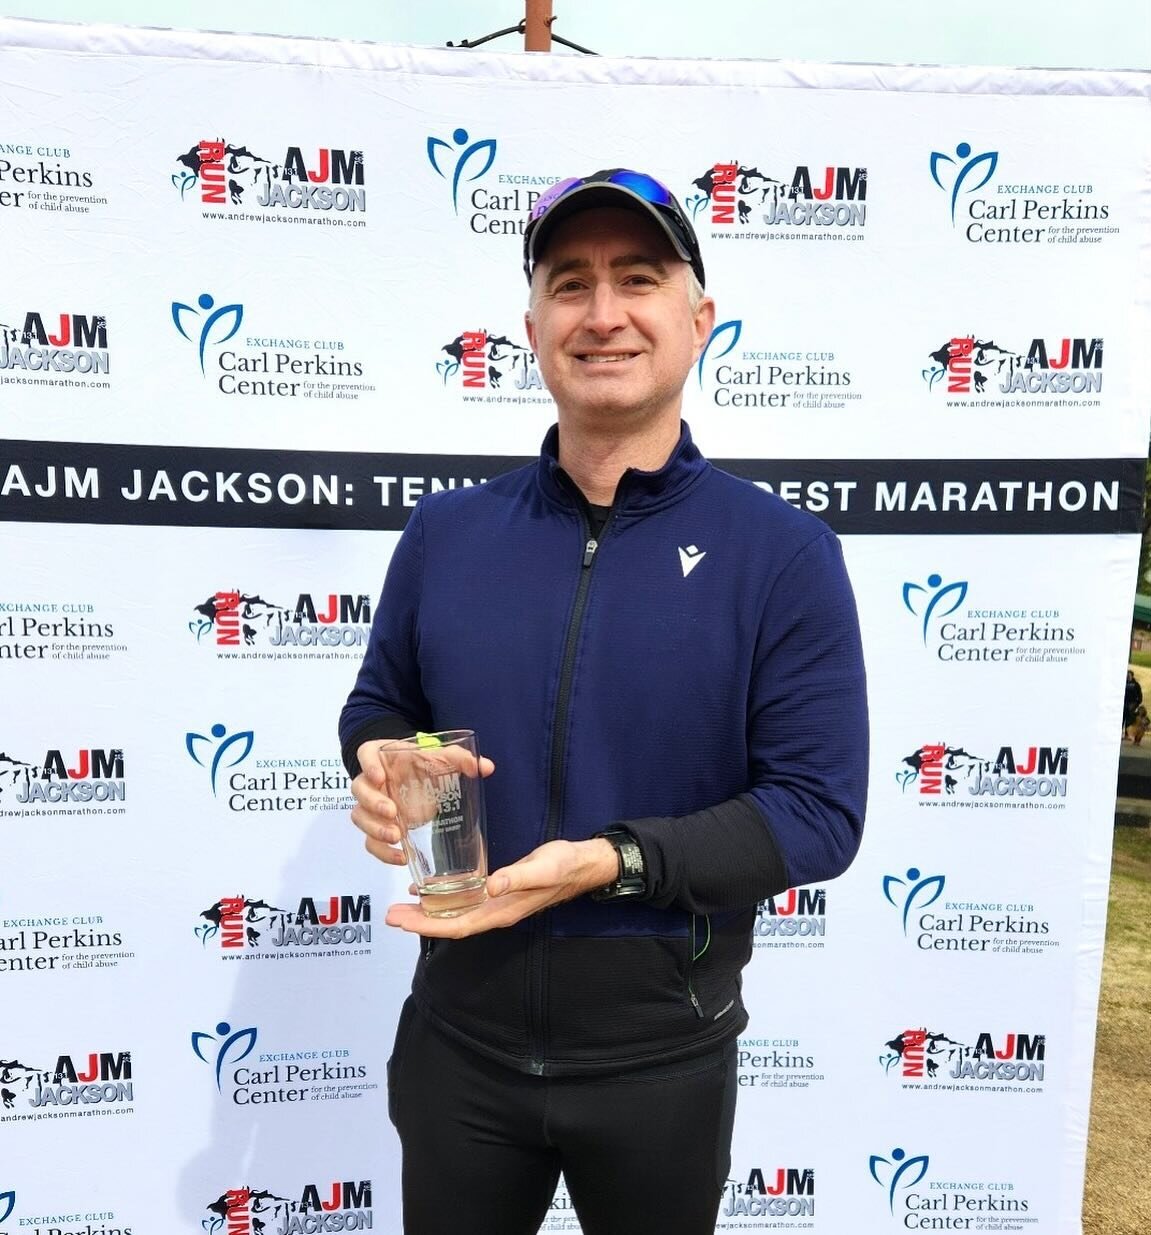 Andrew Jackson Half-Marathon: Jeff executed a strong race to reach his goal for the day. When an experienced racer shows up healthy, sets the proper goal, then runs a patient race with a negative split and fast finish&hellip; good things happen. He e